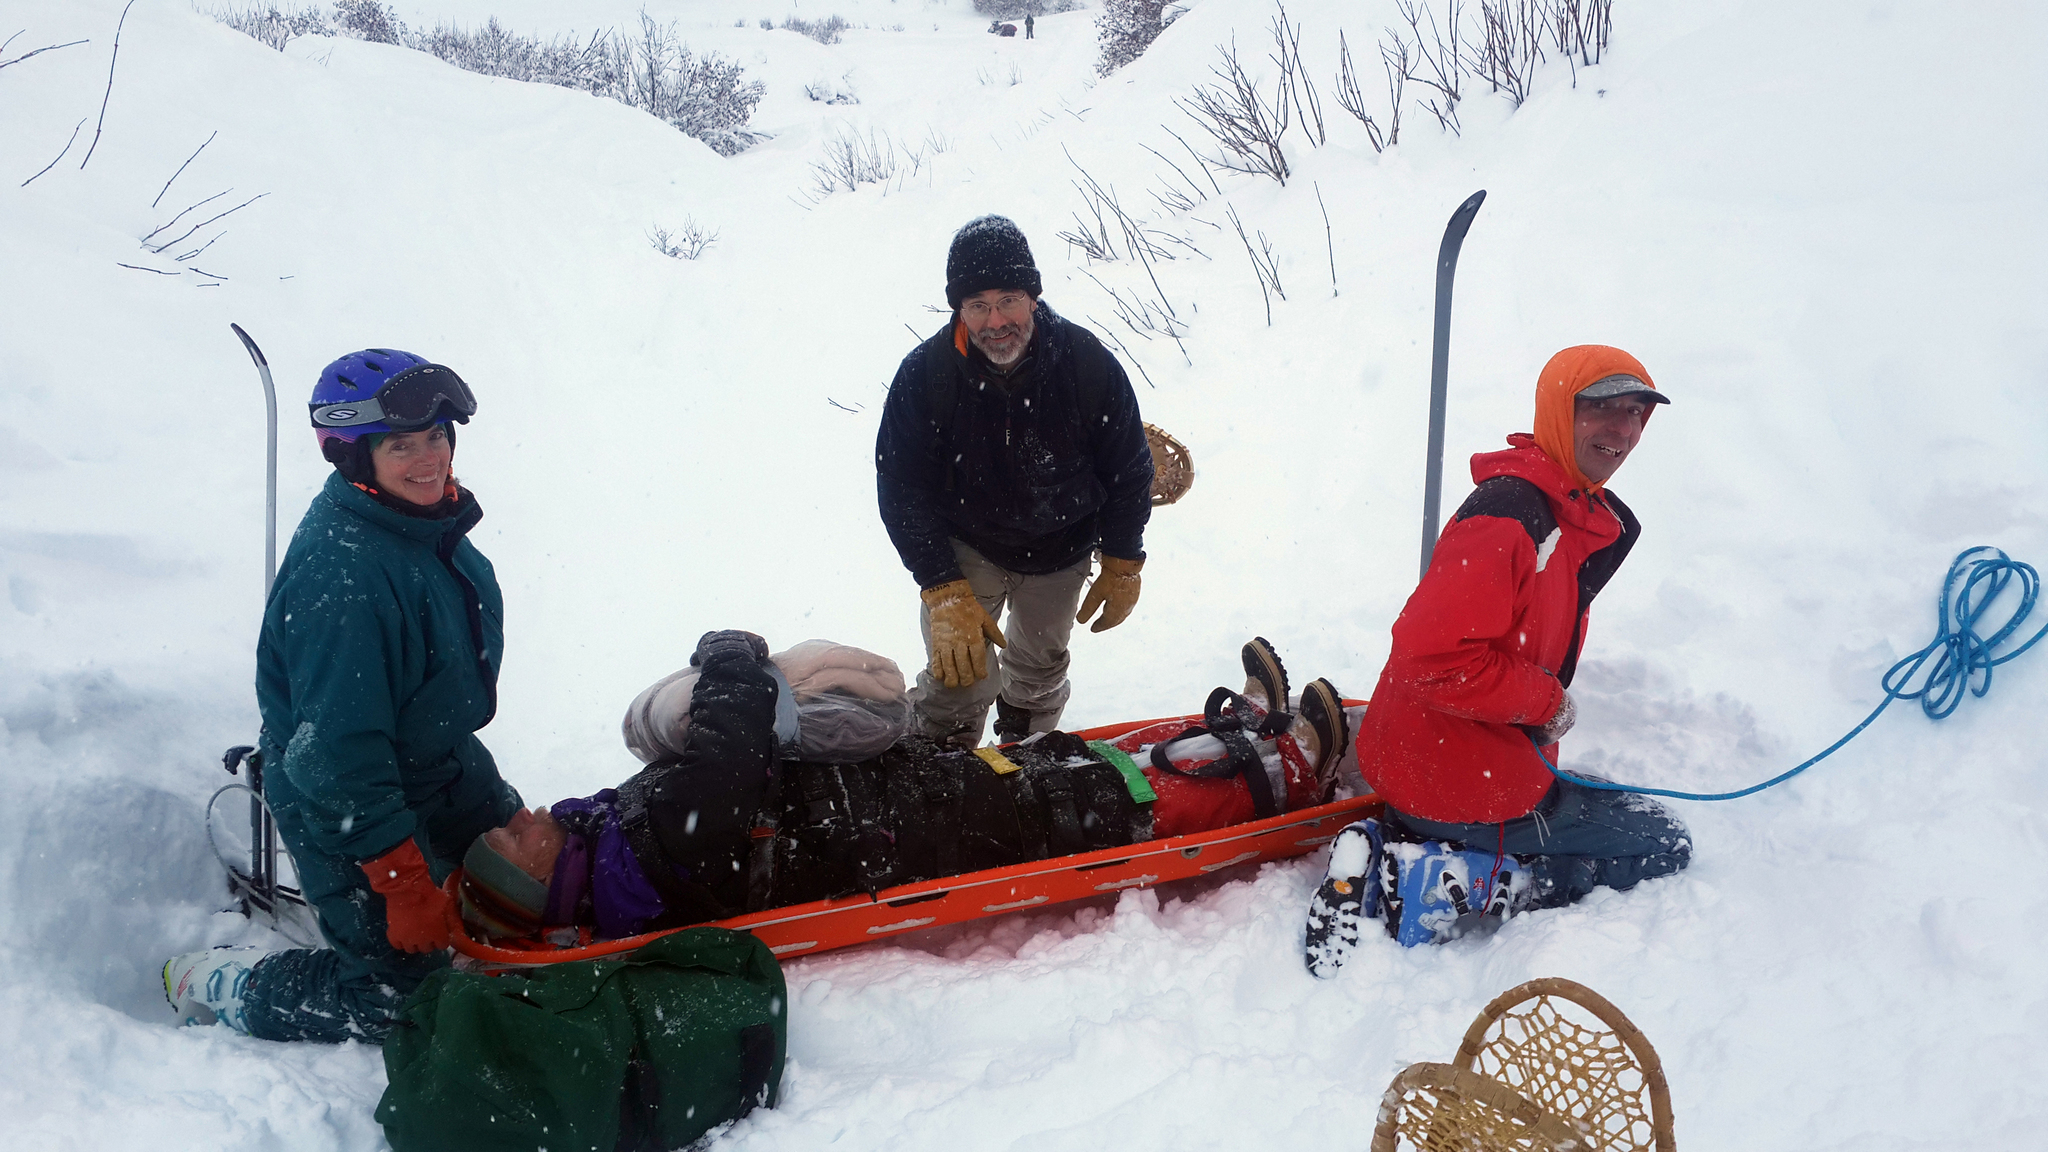 Kachemak Ski Club members do rescue training on Sunday at the Homer Rope Tow. Participating were, from left to right, Karen Northrup, Bill Morse (in sled), KSC president Dr. Randy Wiest, and Doug Reid.